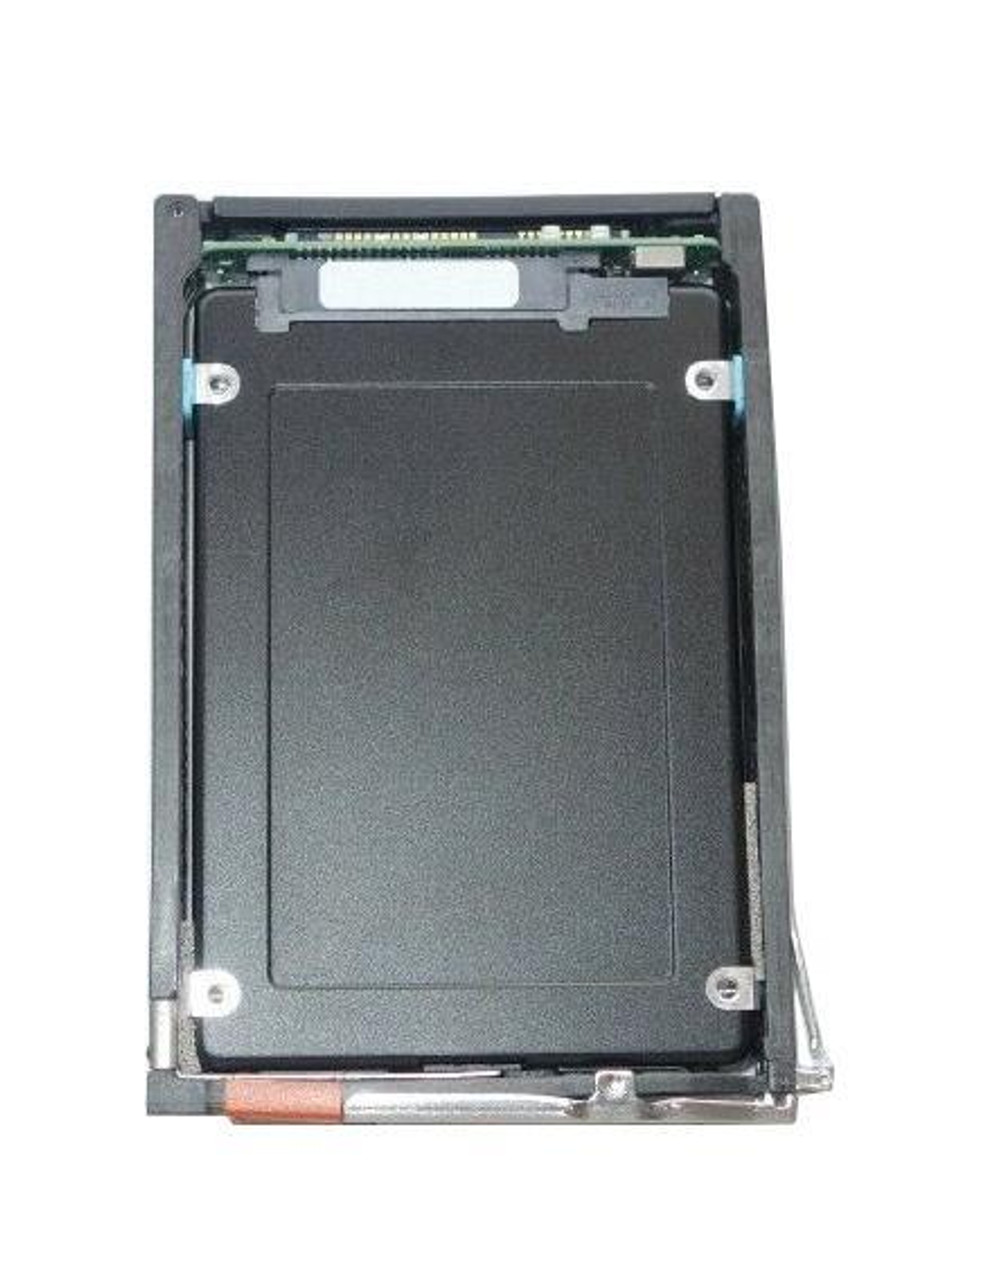 005-053490 EMC 15.36TB SAS 12Gbps 2.5-Inch Internal Solid State Drive (SSD)